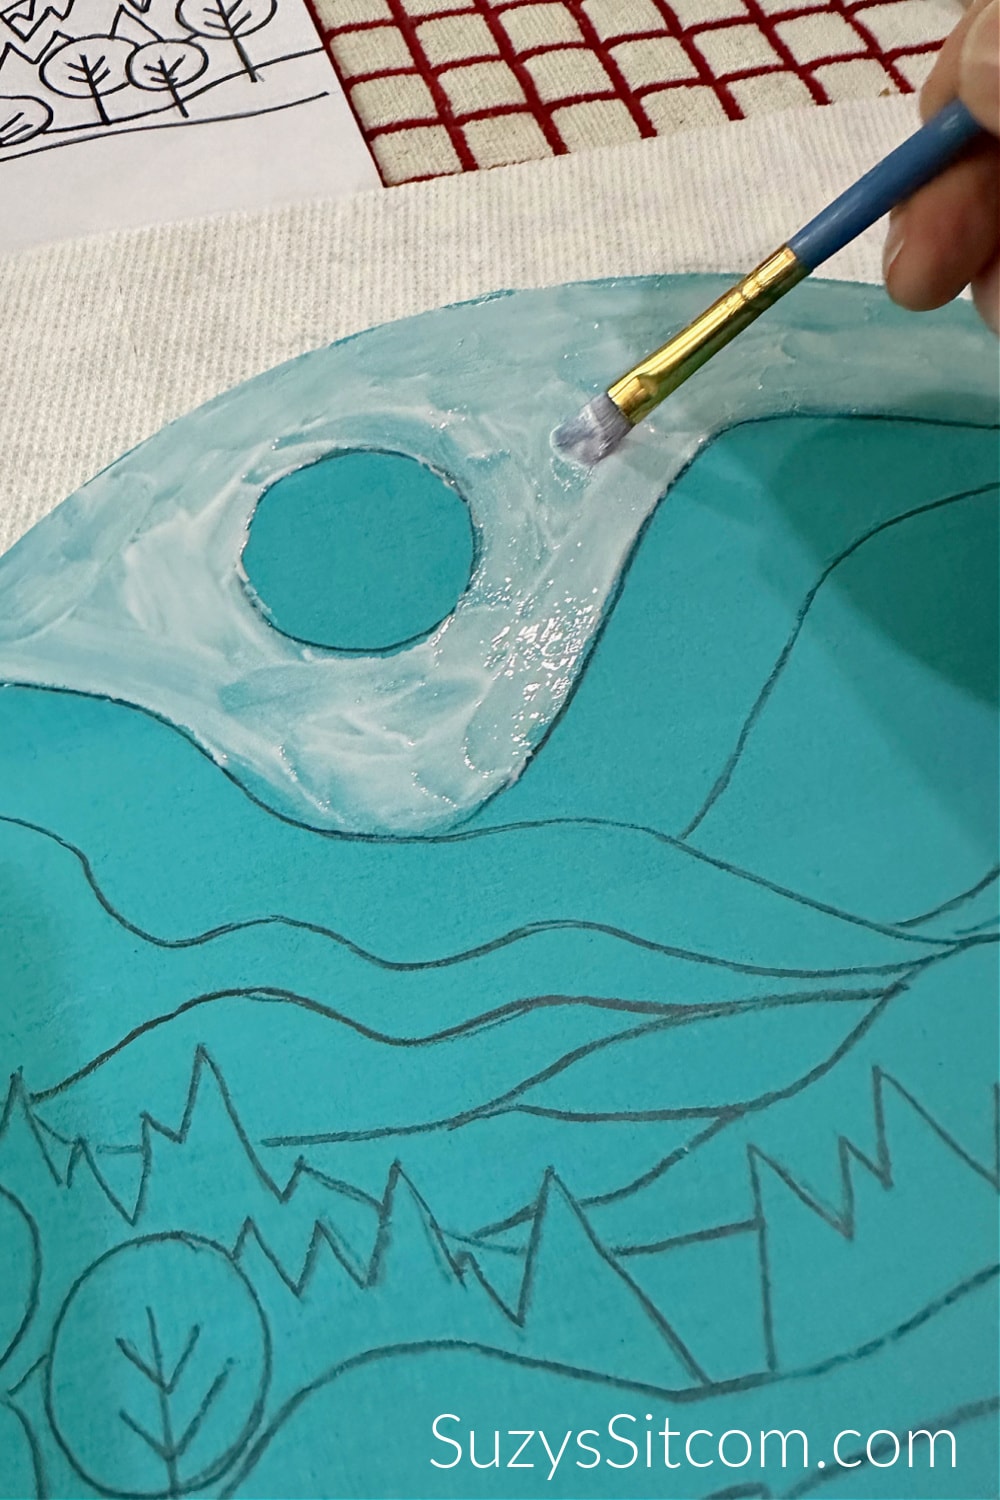 Add a layer of glue to a small area.